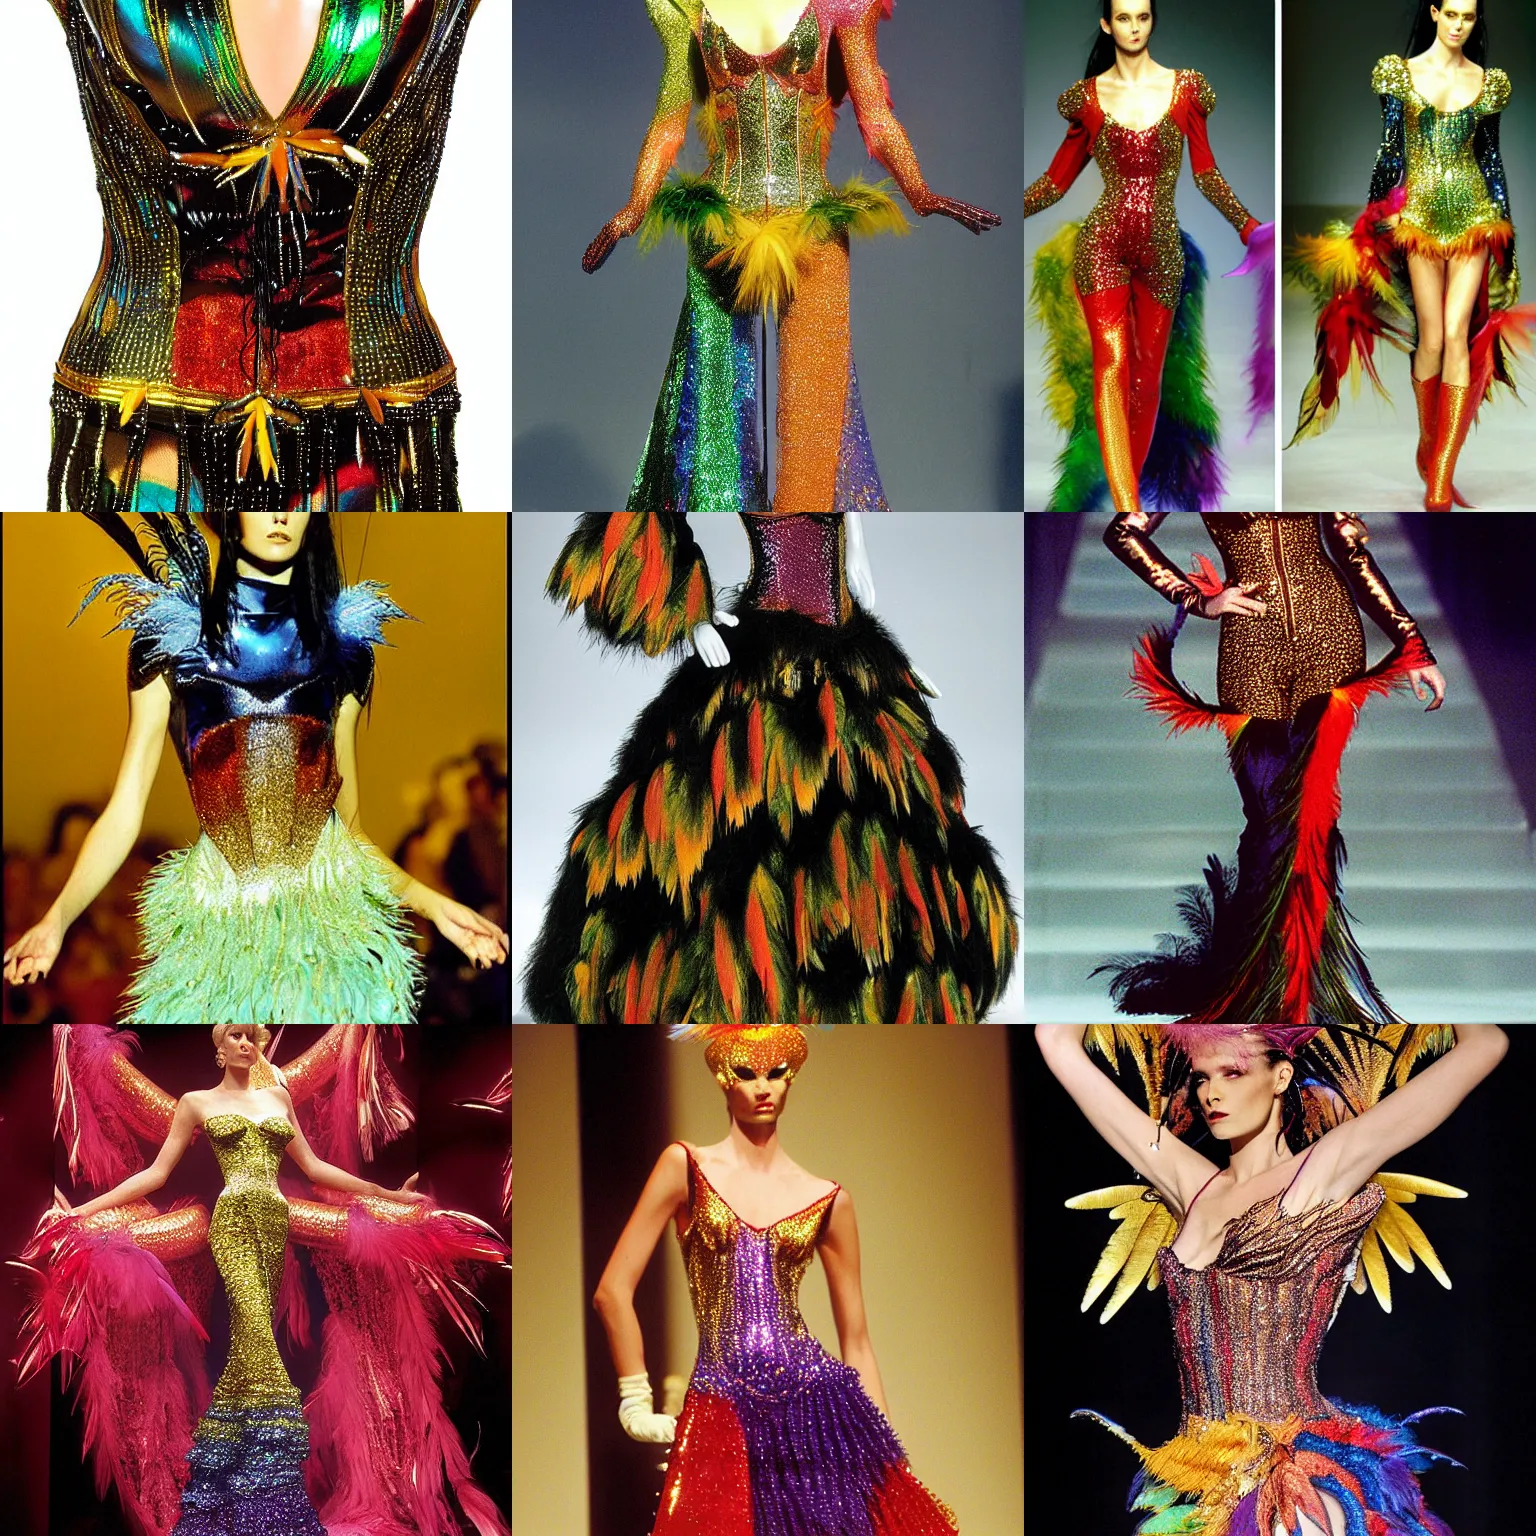 La Chimère by Thierry Autumn/Winter Mugler | OpenArt Diffusion 1997-1998, Stable 